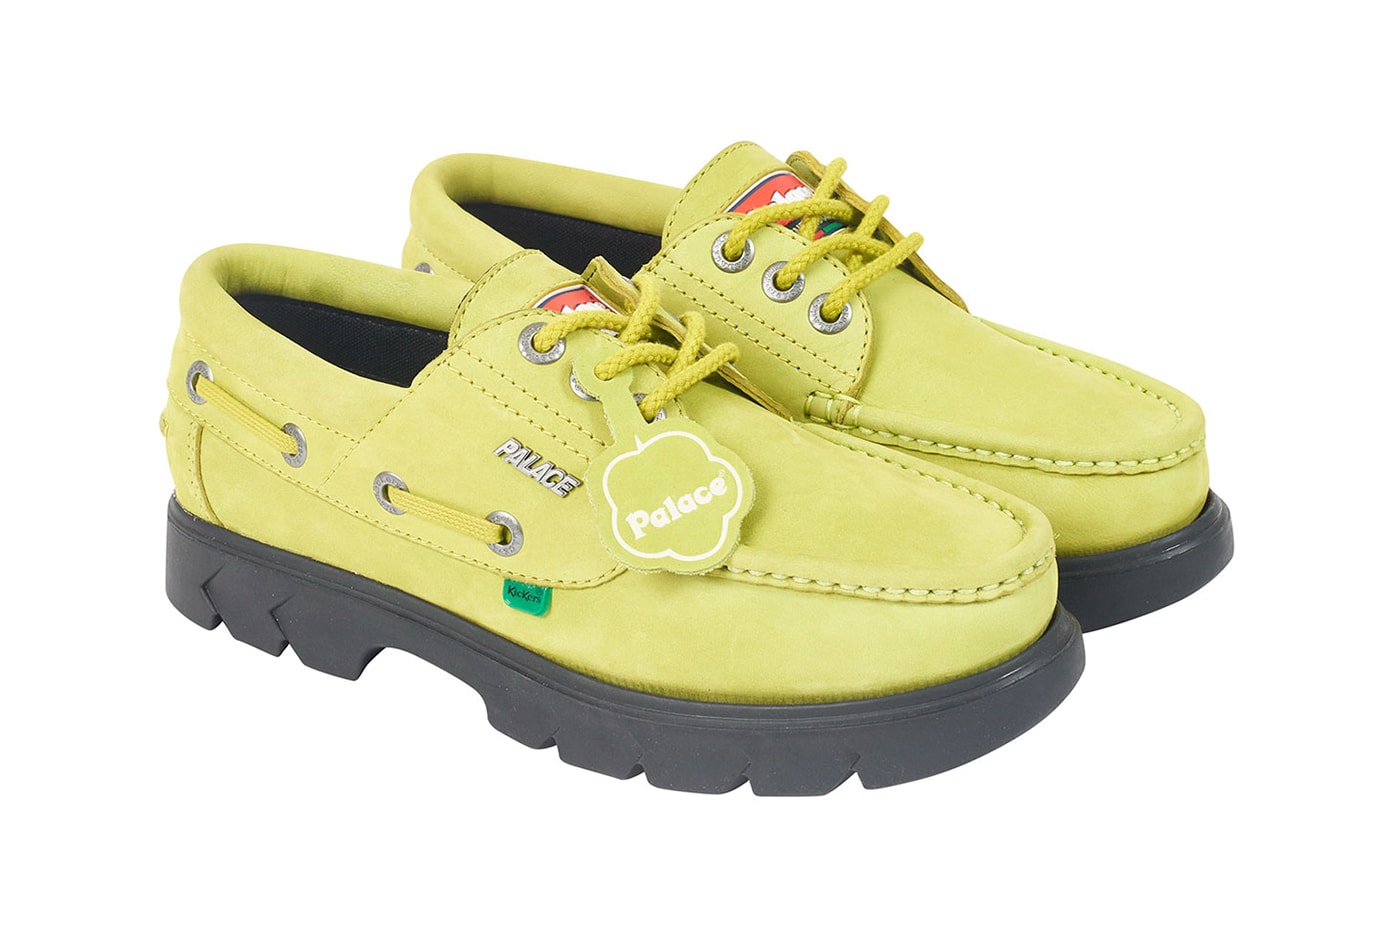 Palace 2019 Summer Footwear kickers collaboration loafer gold bit furry horsehair slip on boat shoe lug sole colorways 